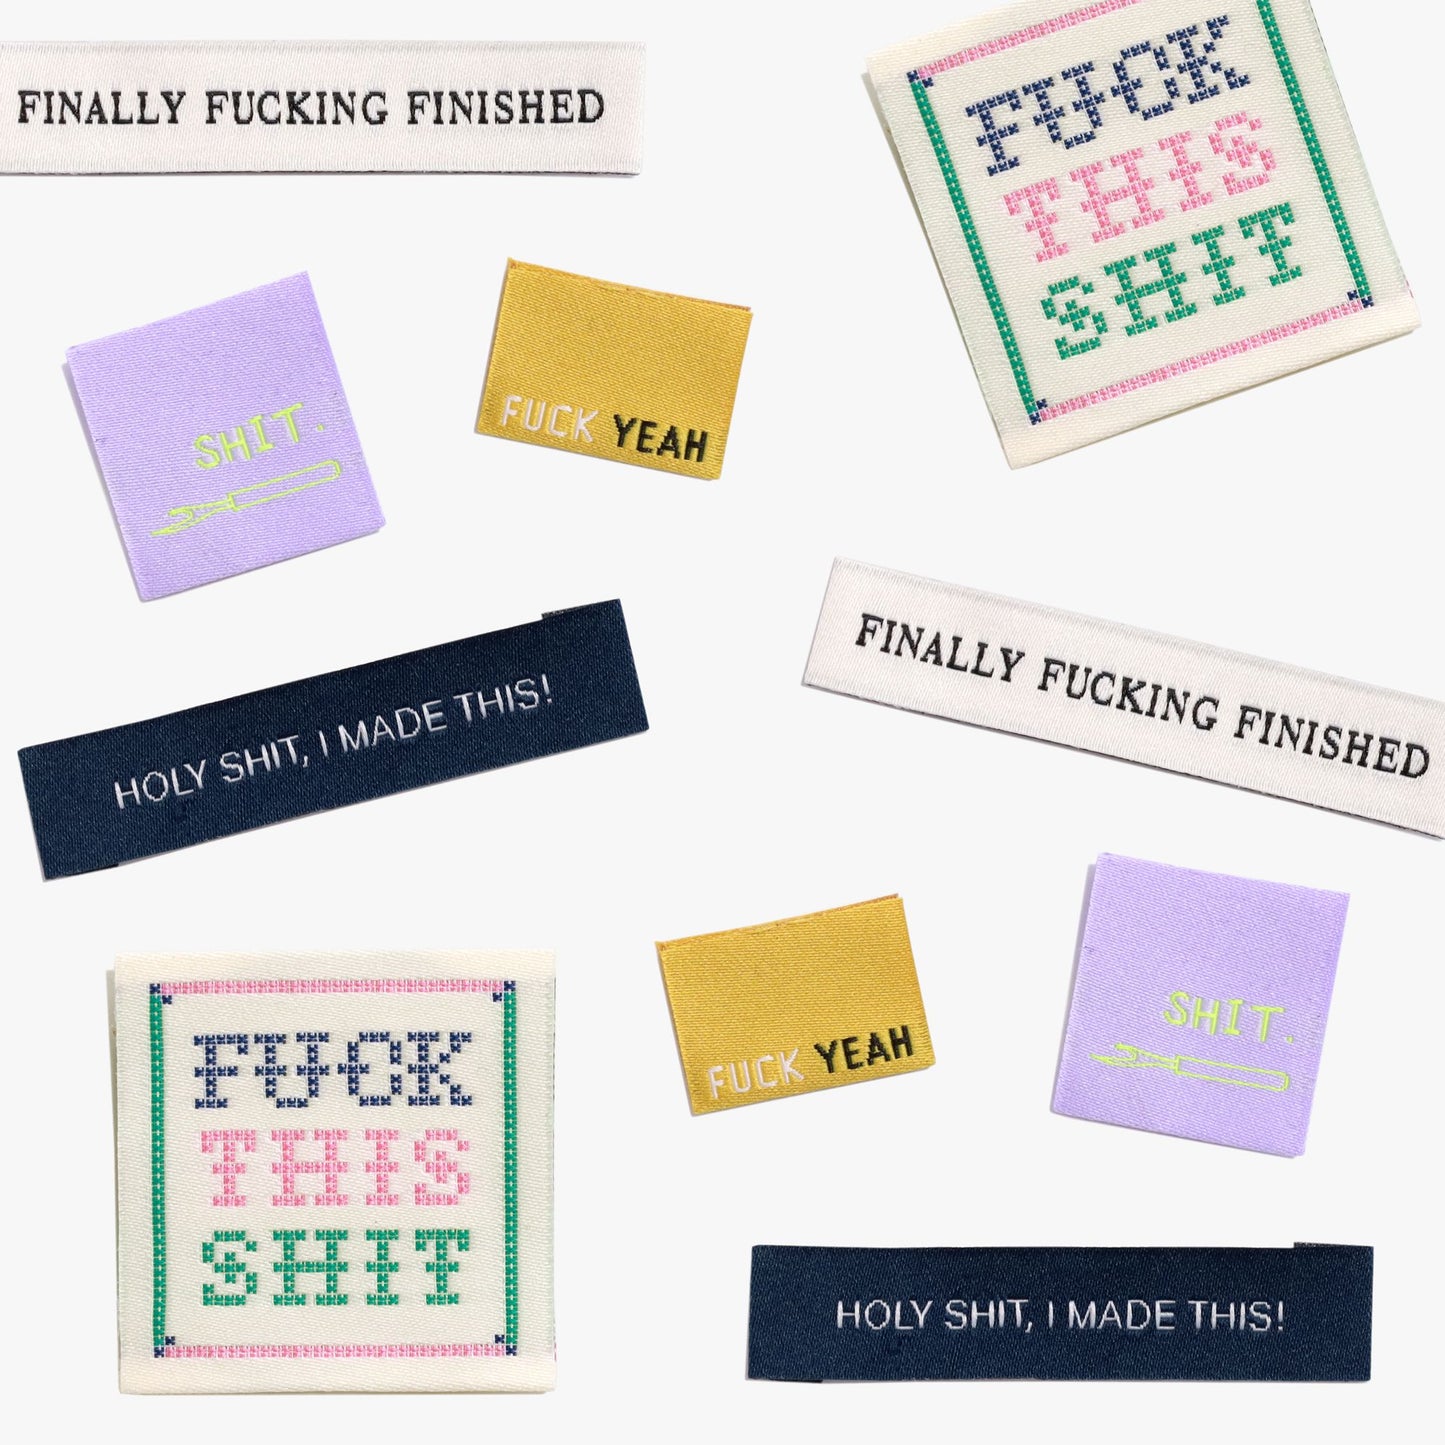 KATM LABELS | The Sweary Sewist 2.0